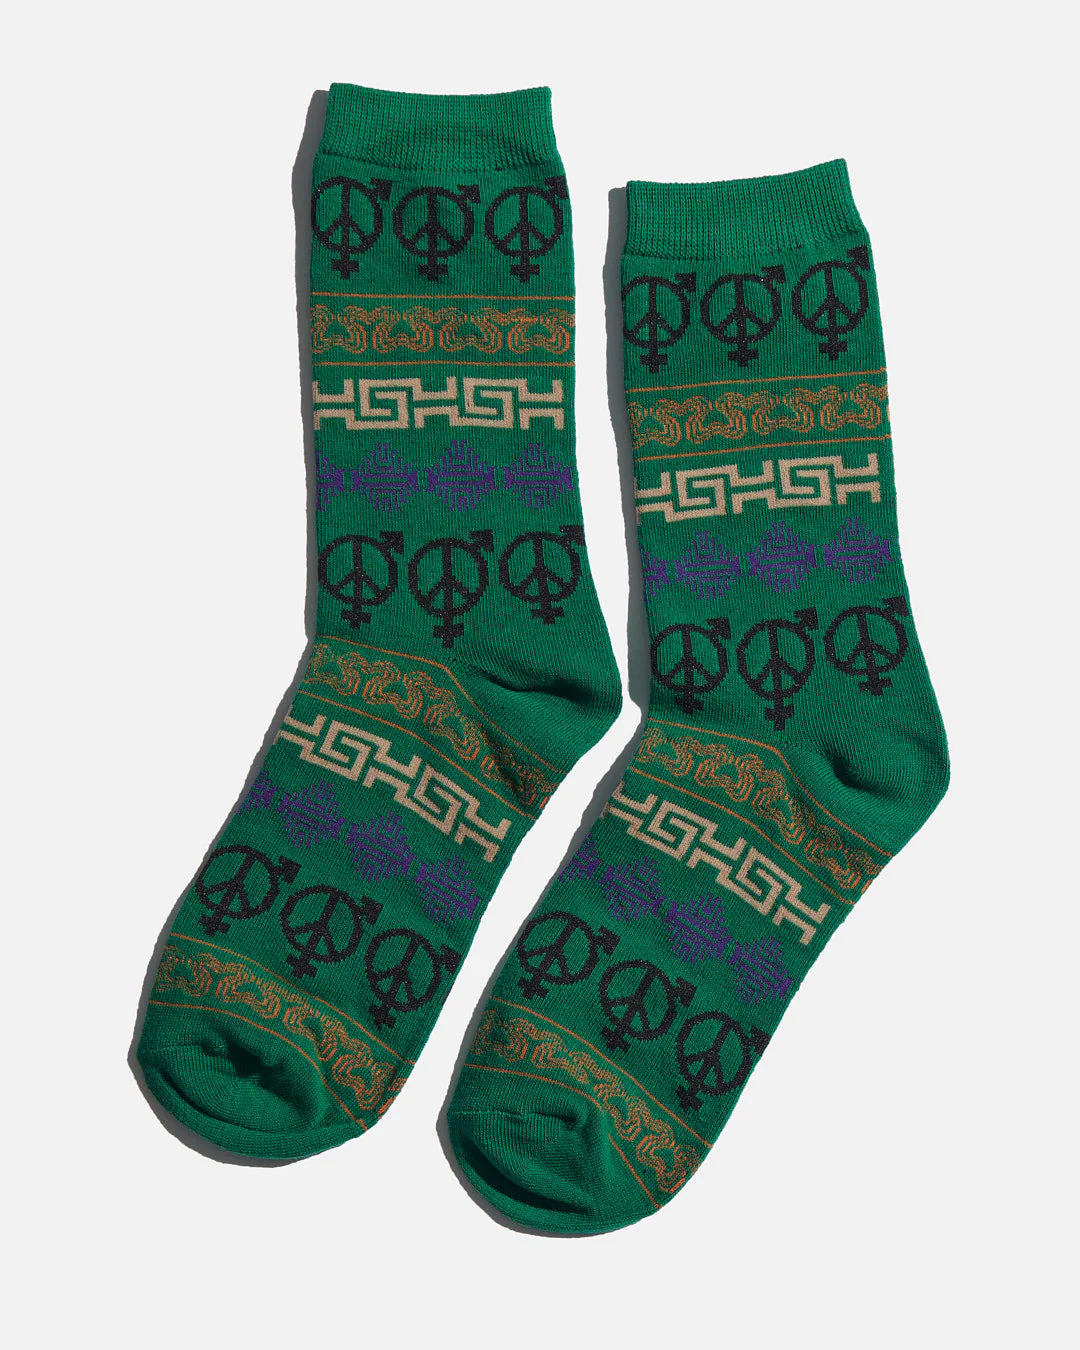 Sexhippies Local Letters Socks "Kelly Green"